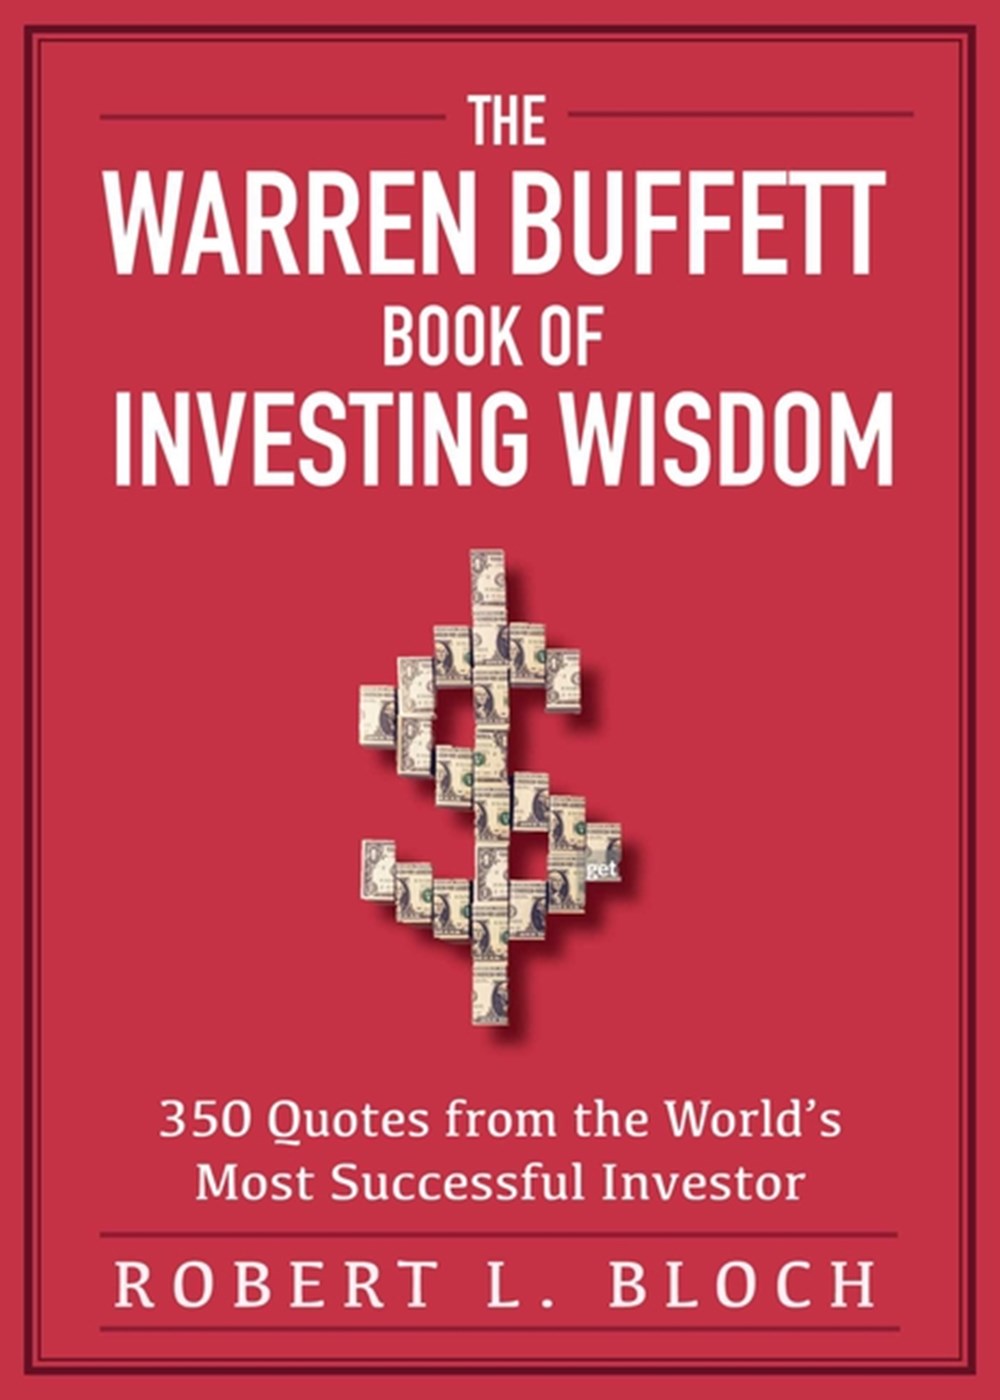 Warren Buffett Book of Investing Wisdom 350 Quotes from the World's Most Successful Investor